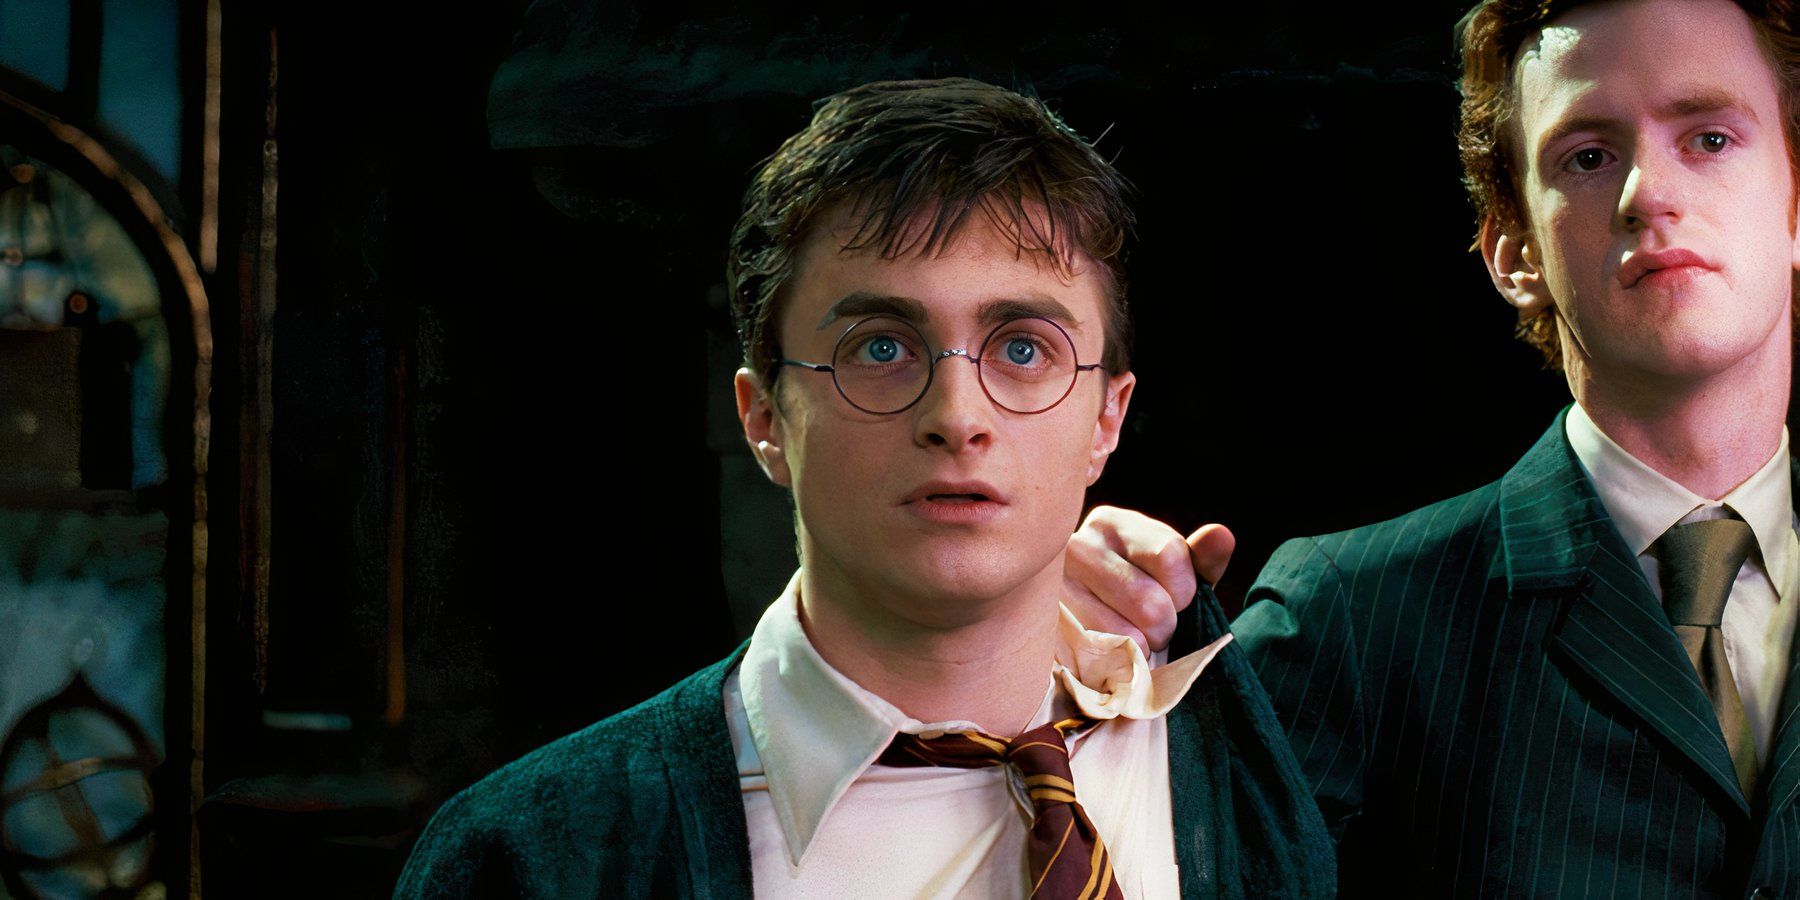 Daniel Radcliffe as Harry Potter in Harry Potter and the Order of the Phoenix